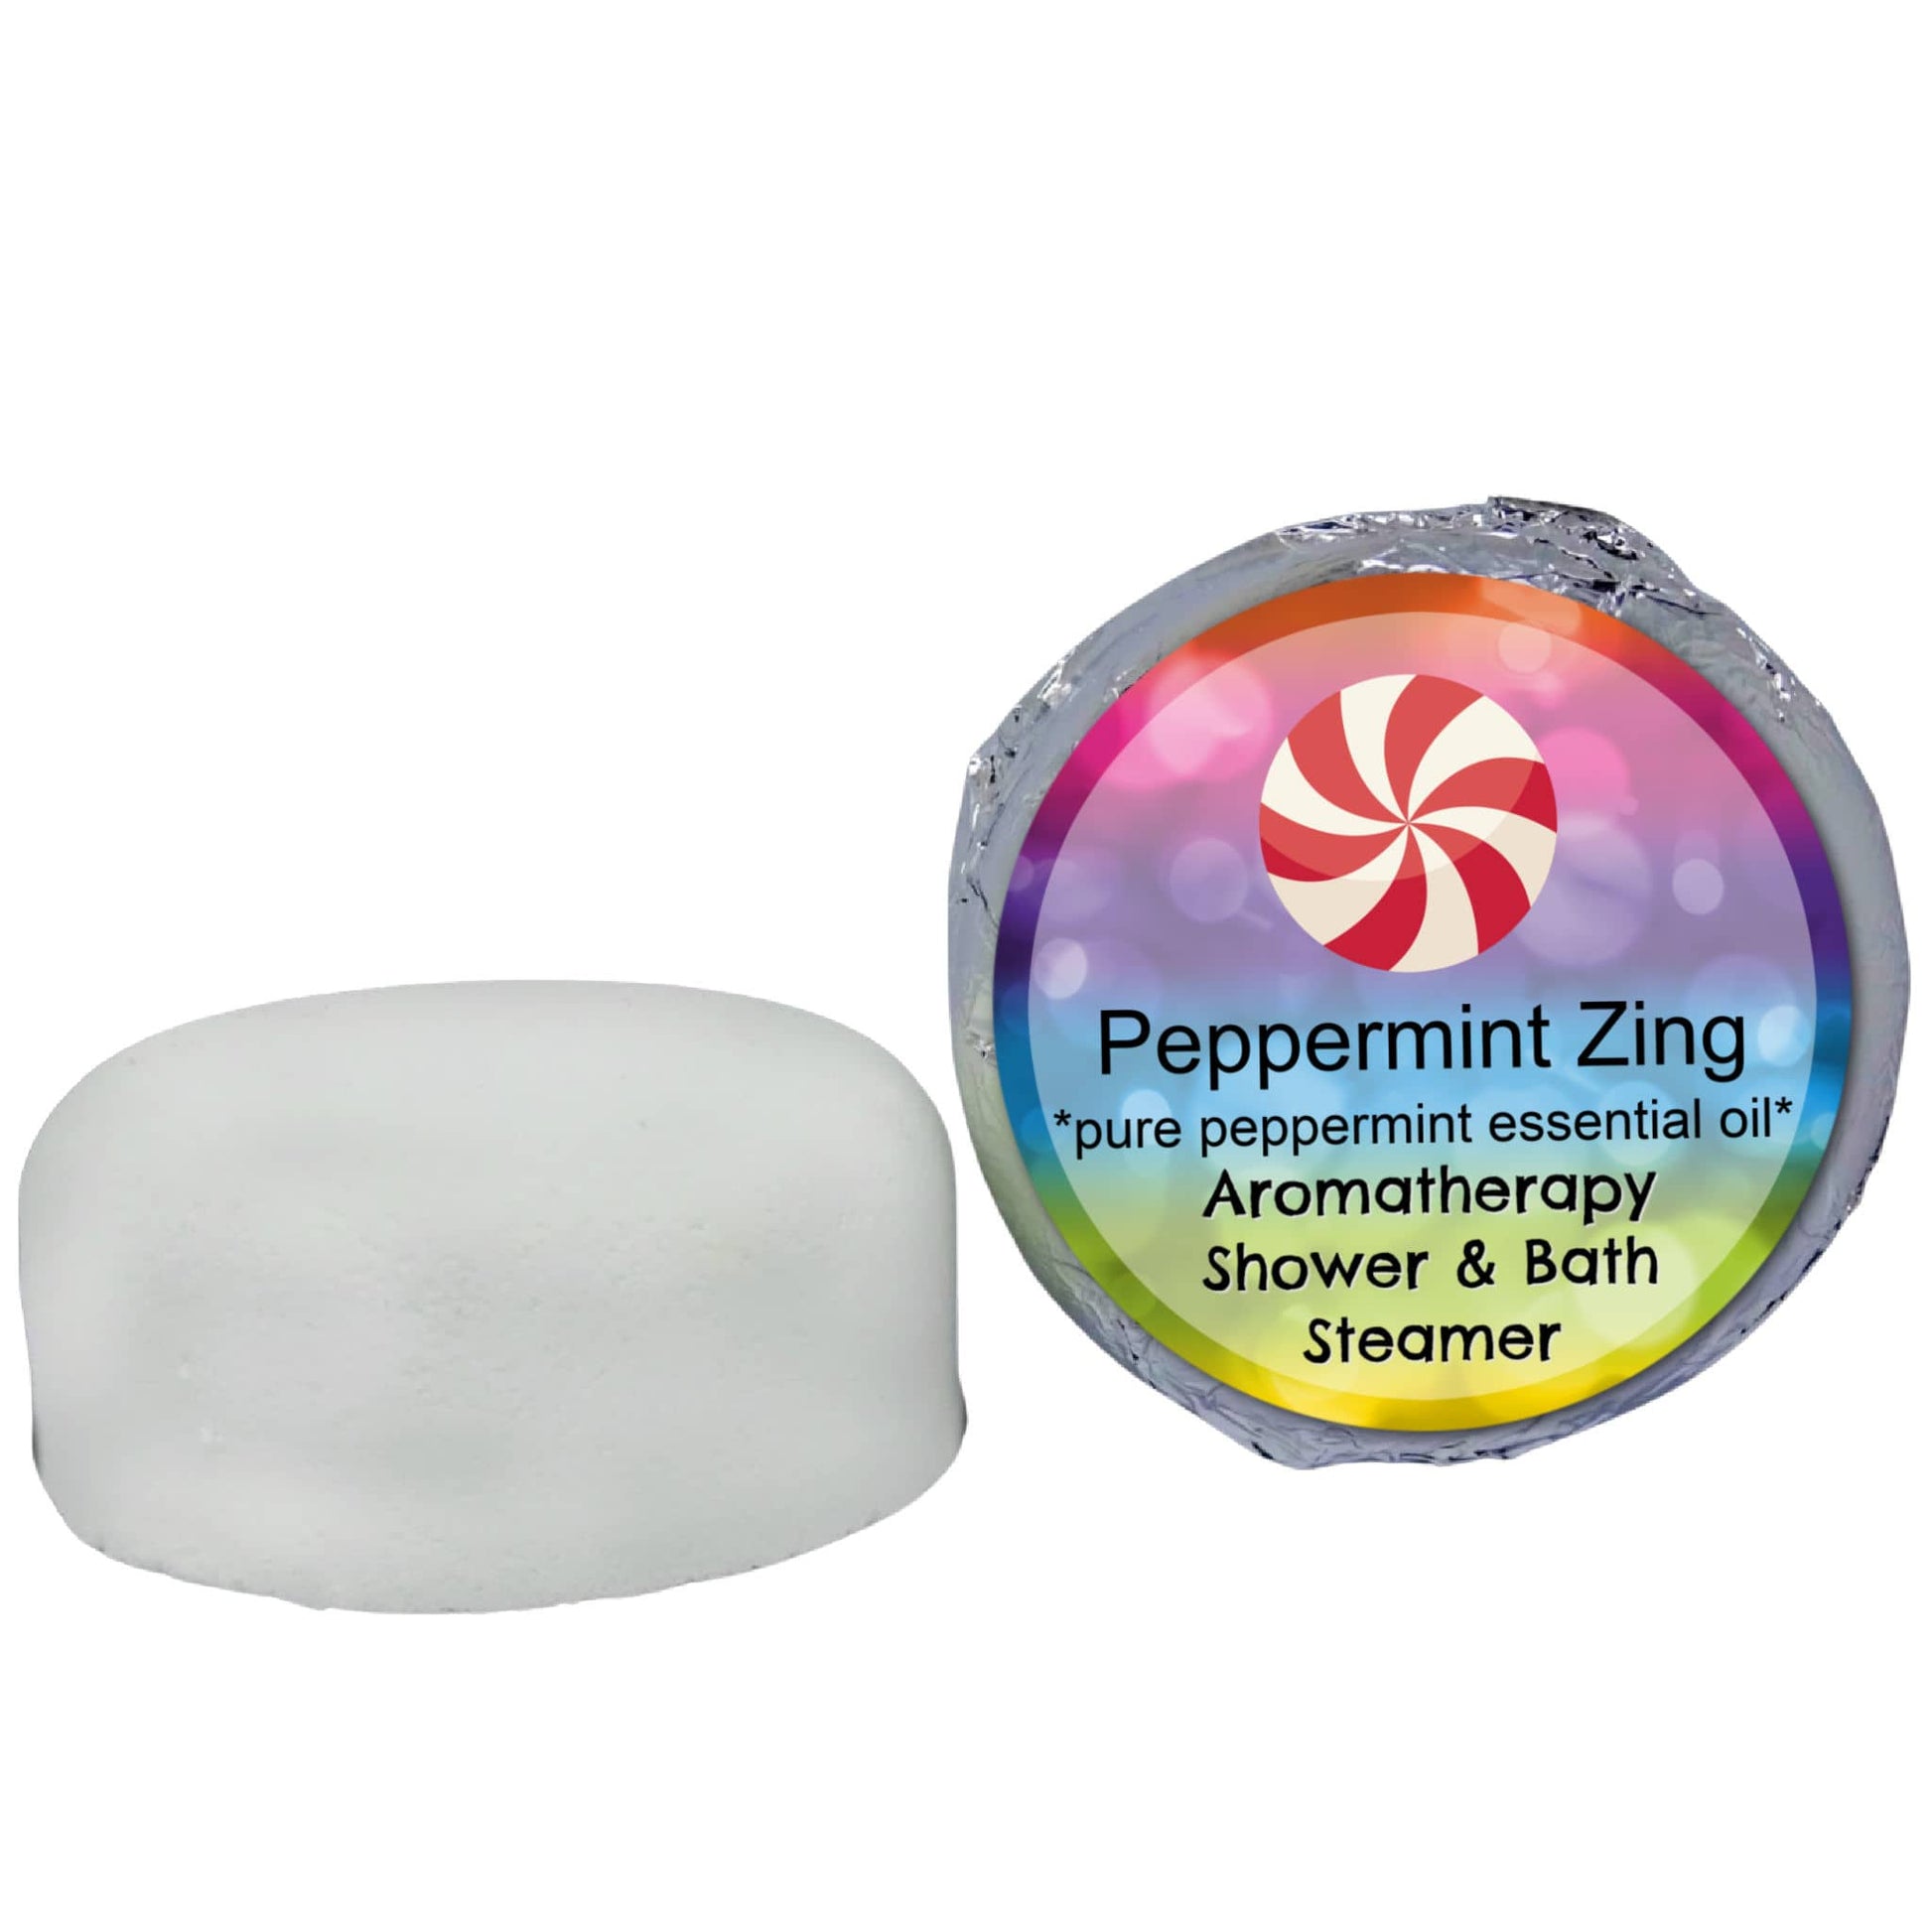 Peppermint Zing Aromatherapy Shower Steamer